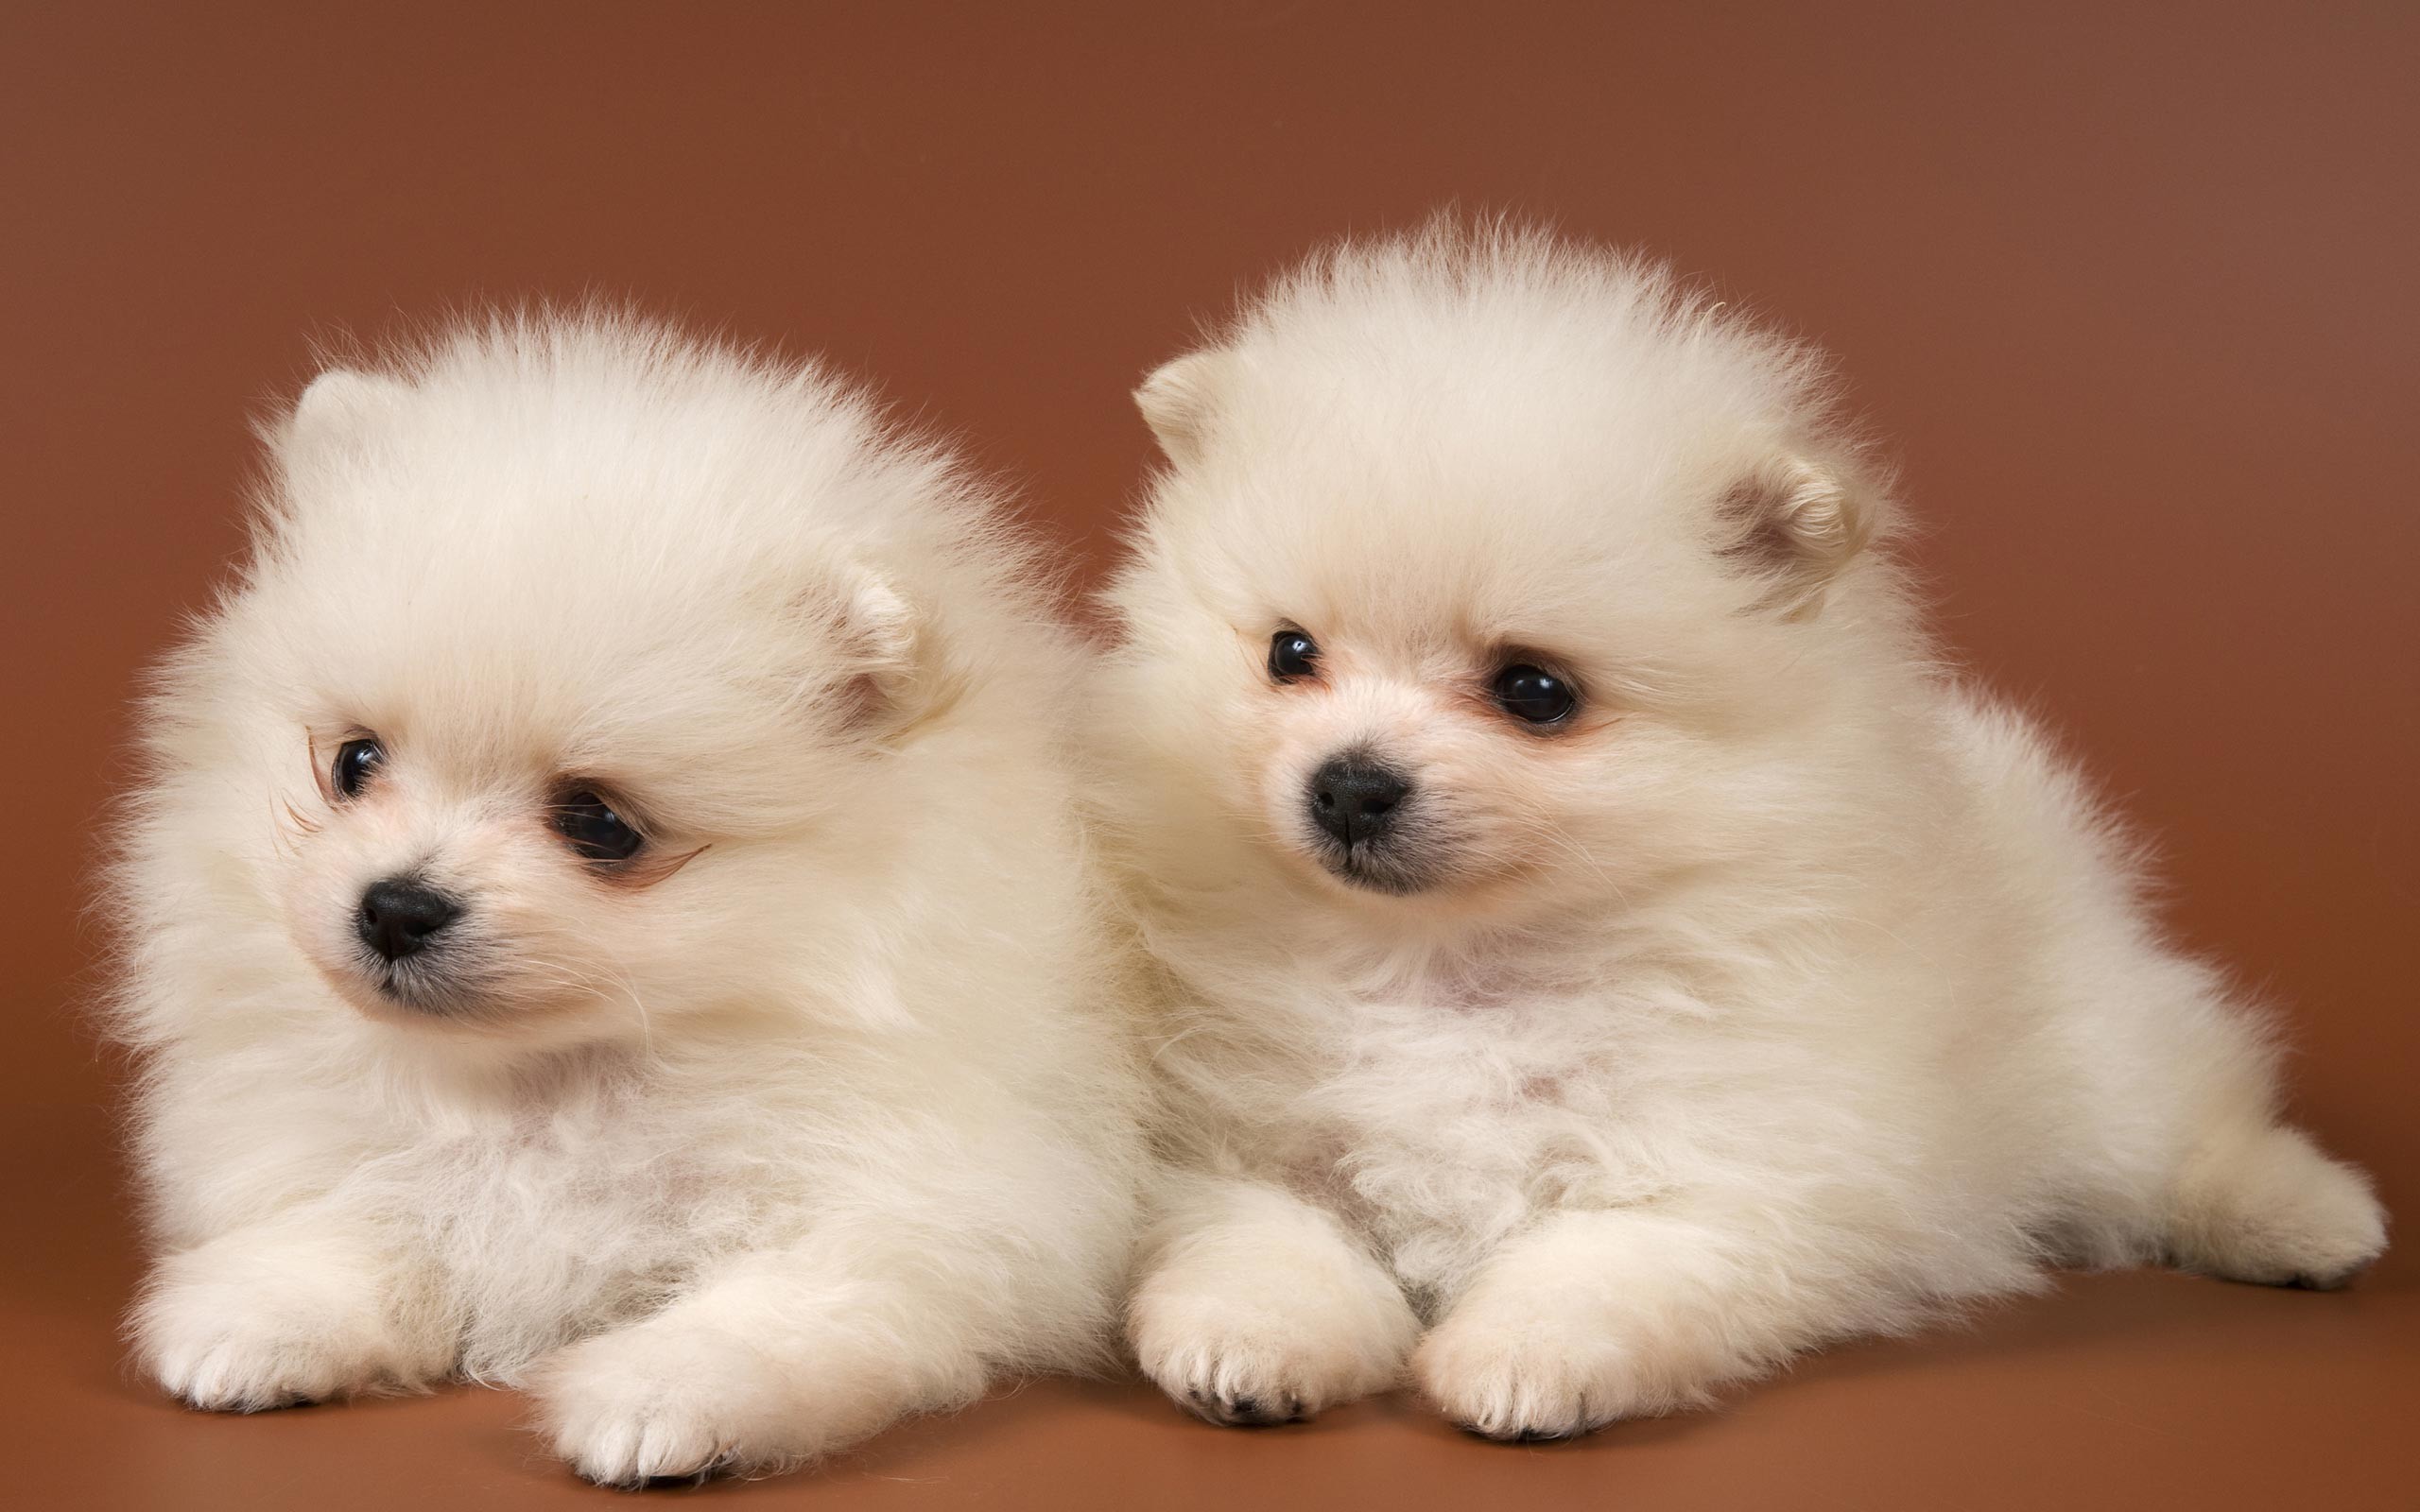 2560x1600 Puppies HD Wallpapers | Hd Wallpapers